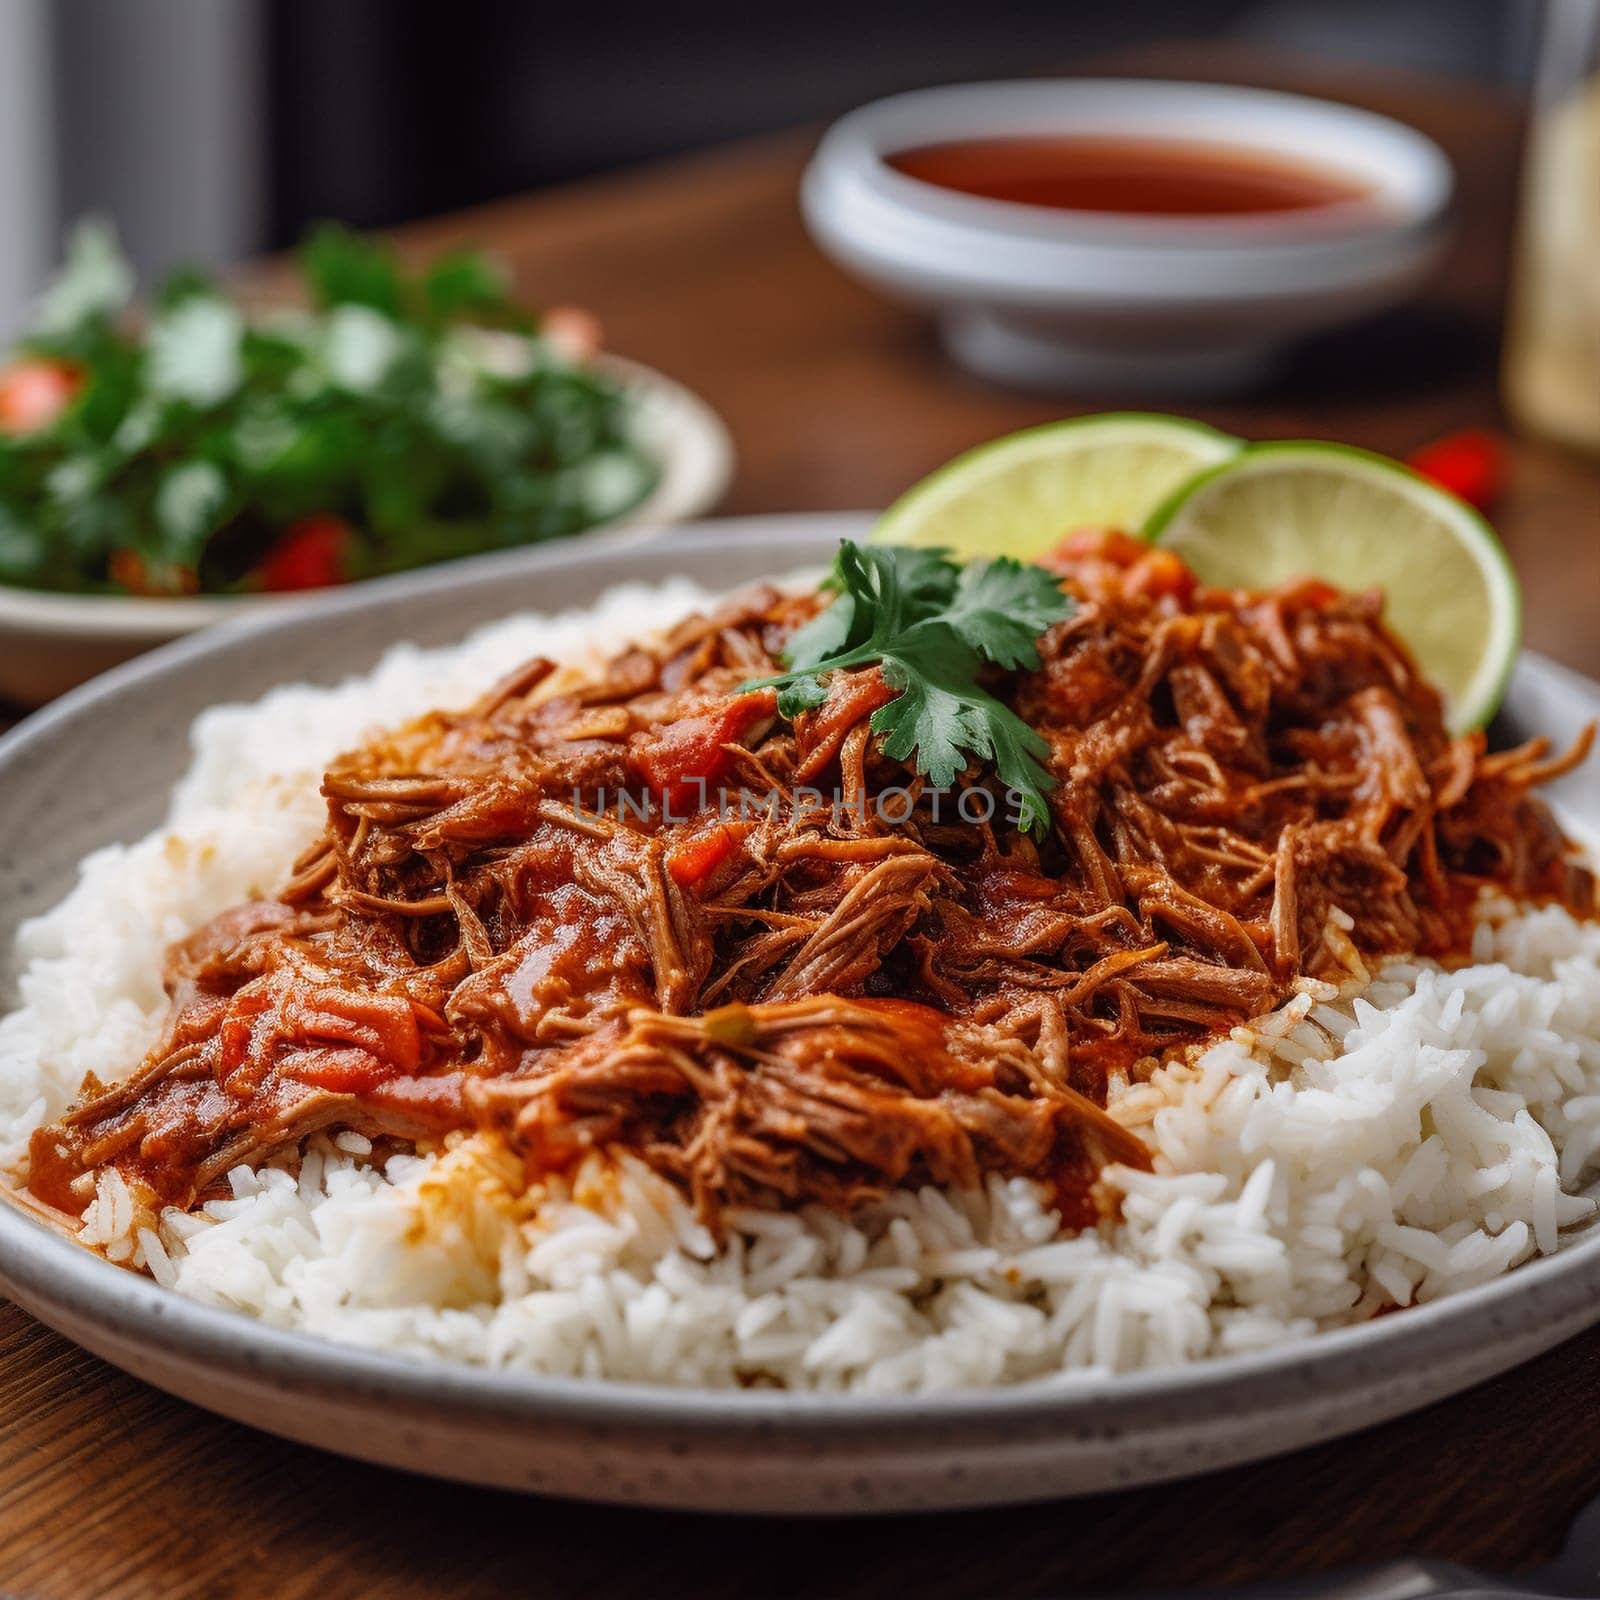 Cuban Ropa Vieja in a Cozy and Inviting Home Kitchen Scene by Sahin